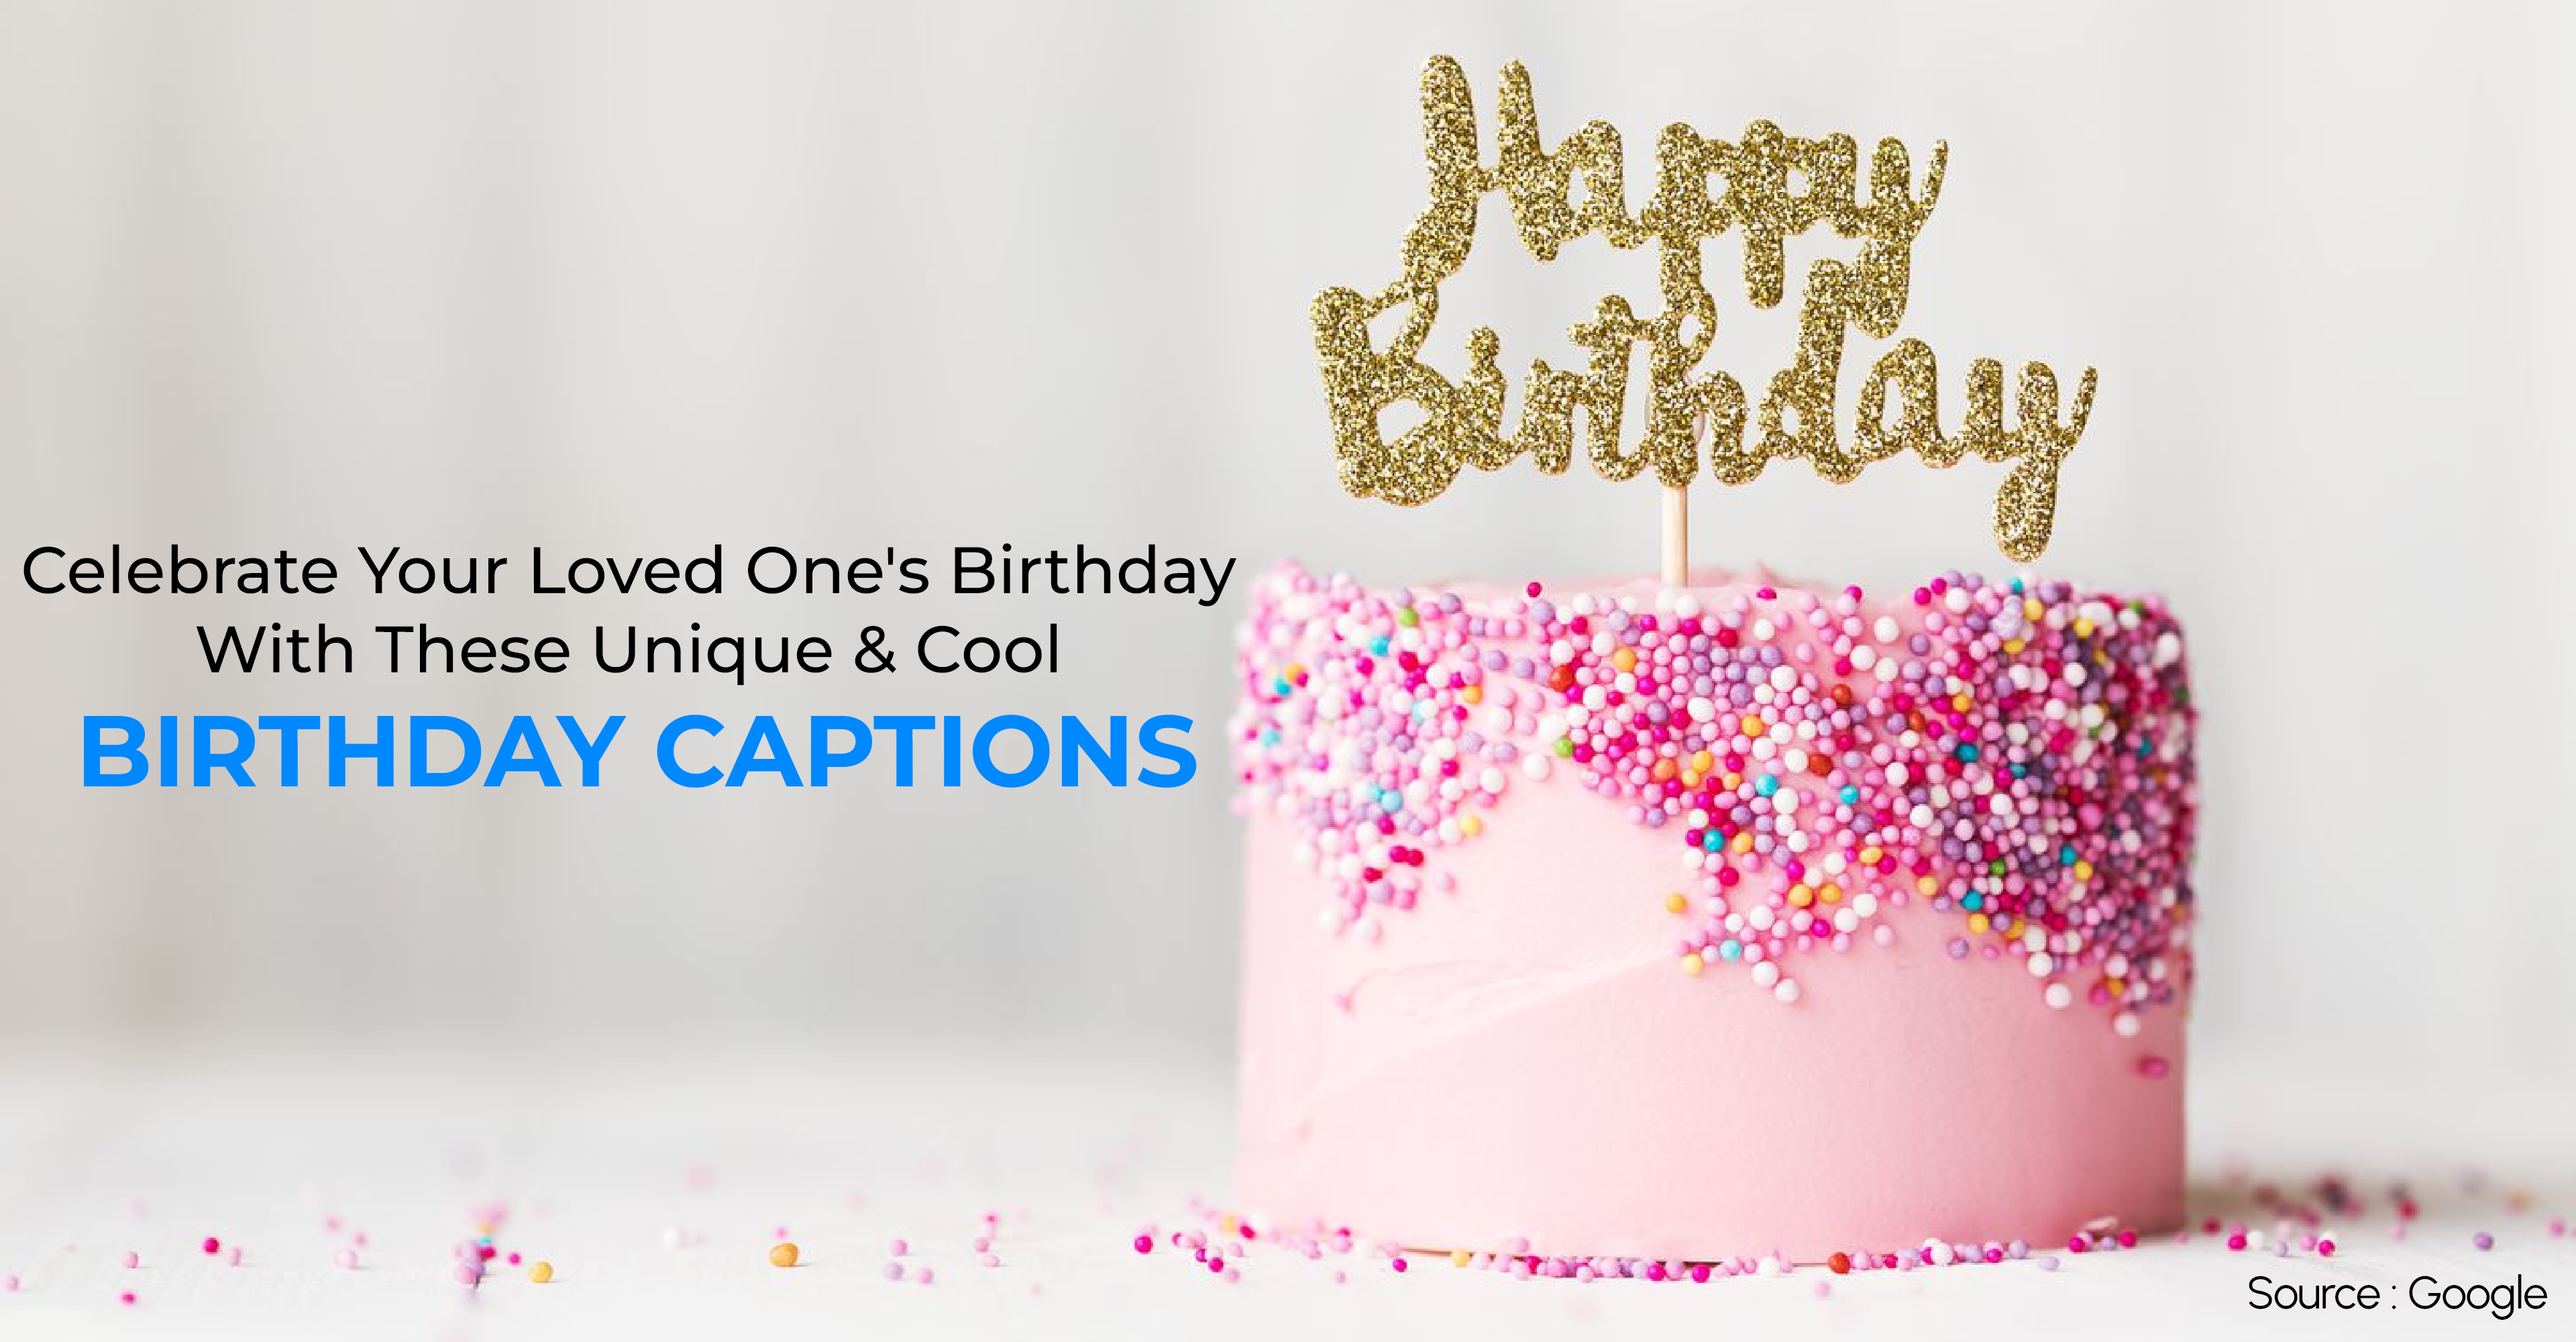 90 Birthday Captions For Instagram To Get Those Candles Lit | Birthday  captions, Birthday captions instagram, Clever captions for instagram